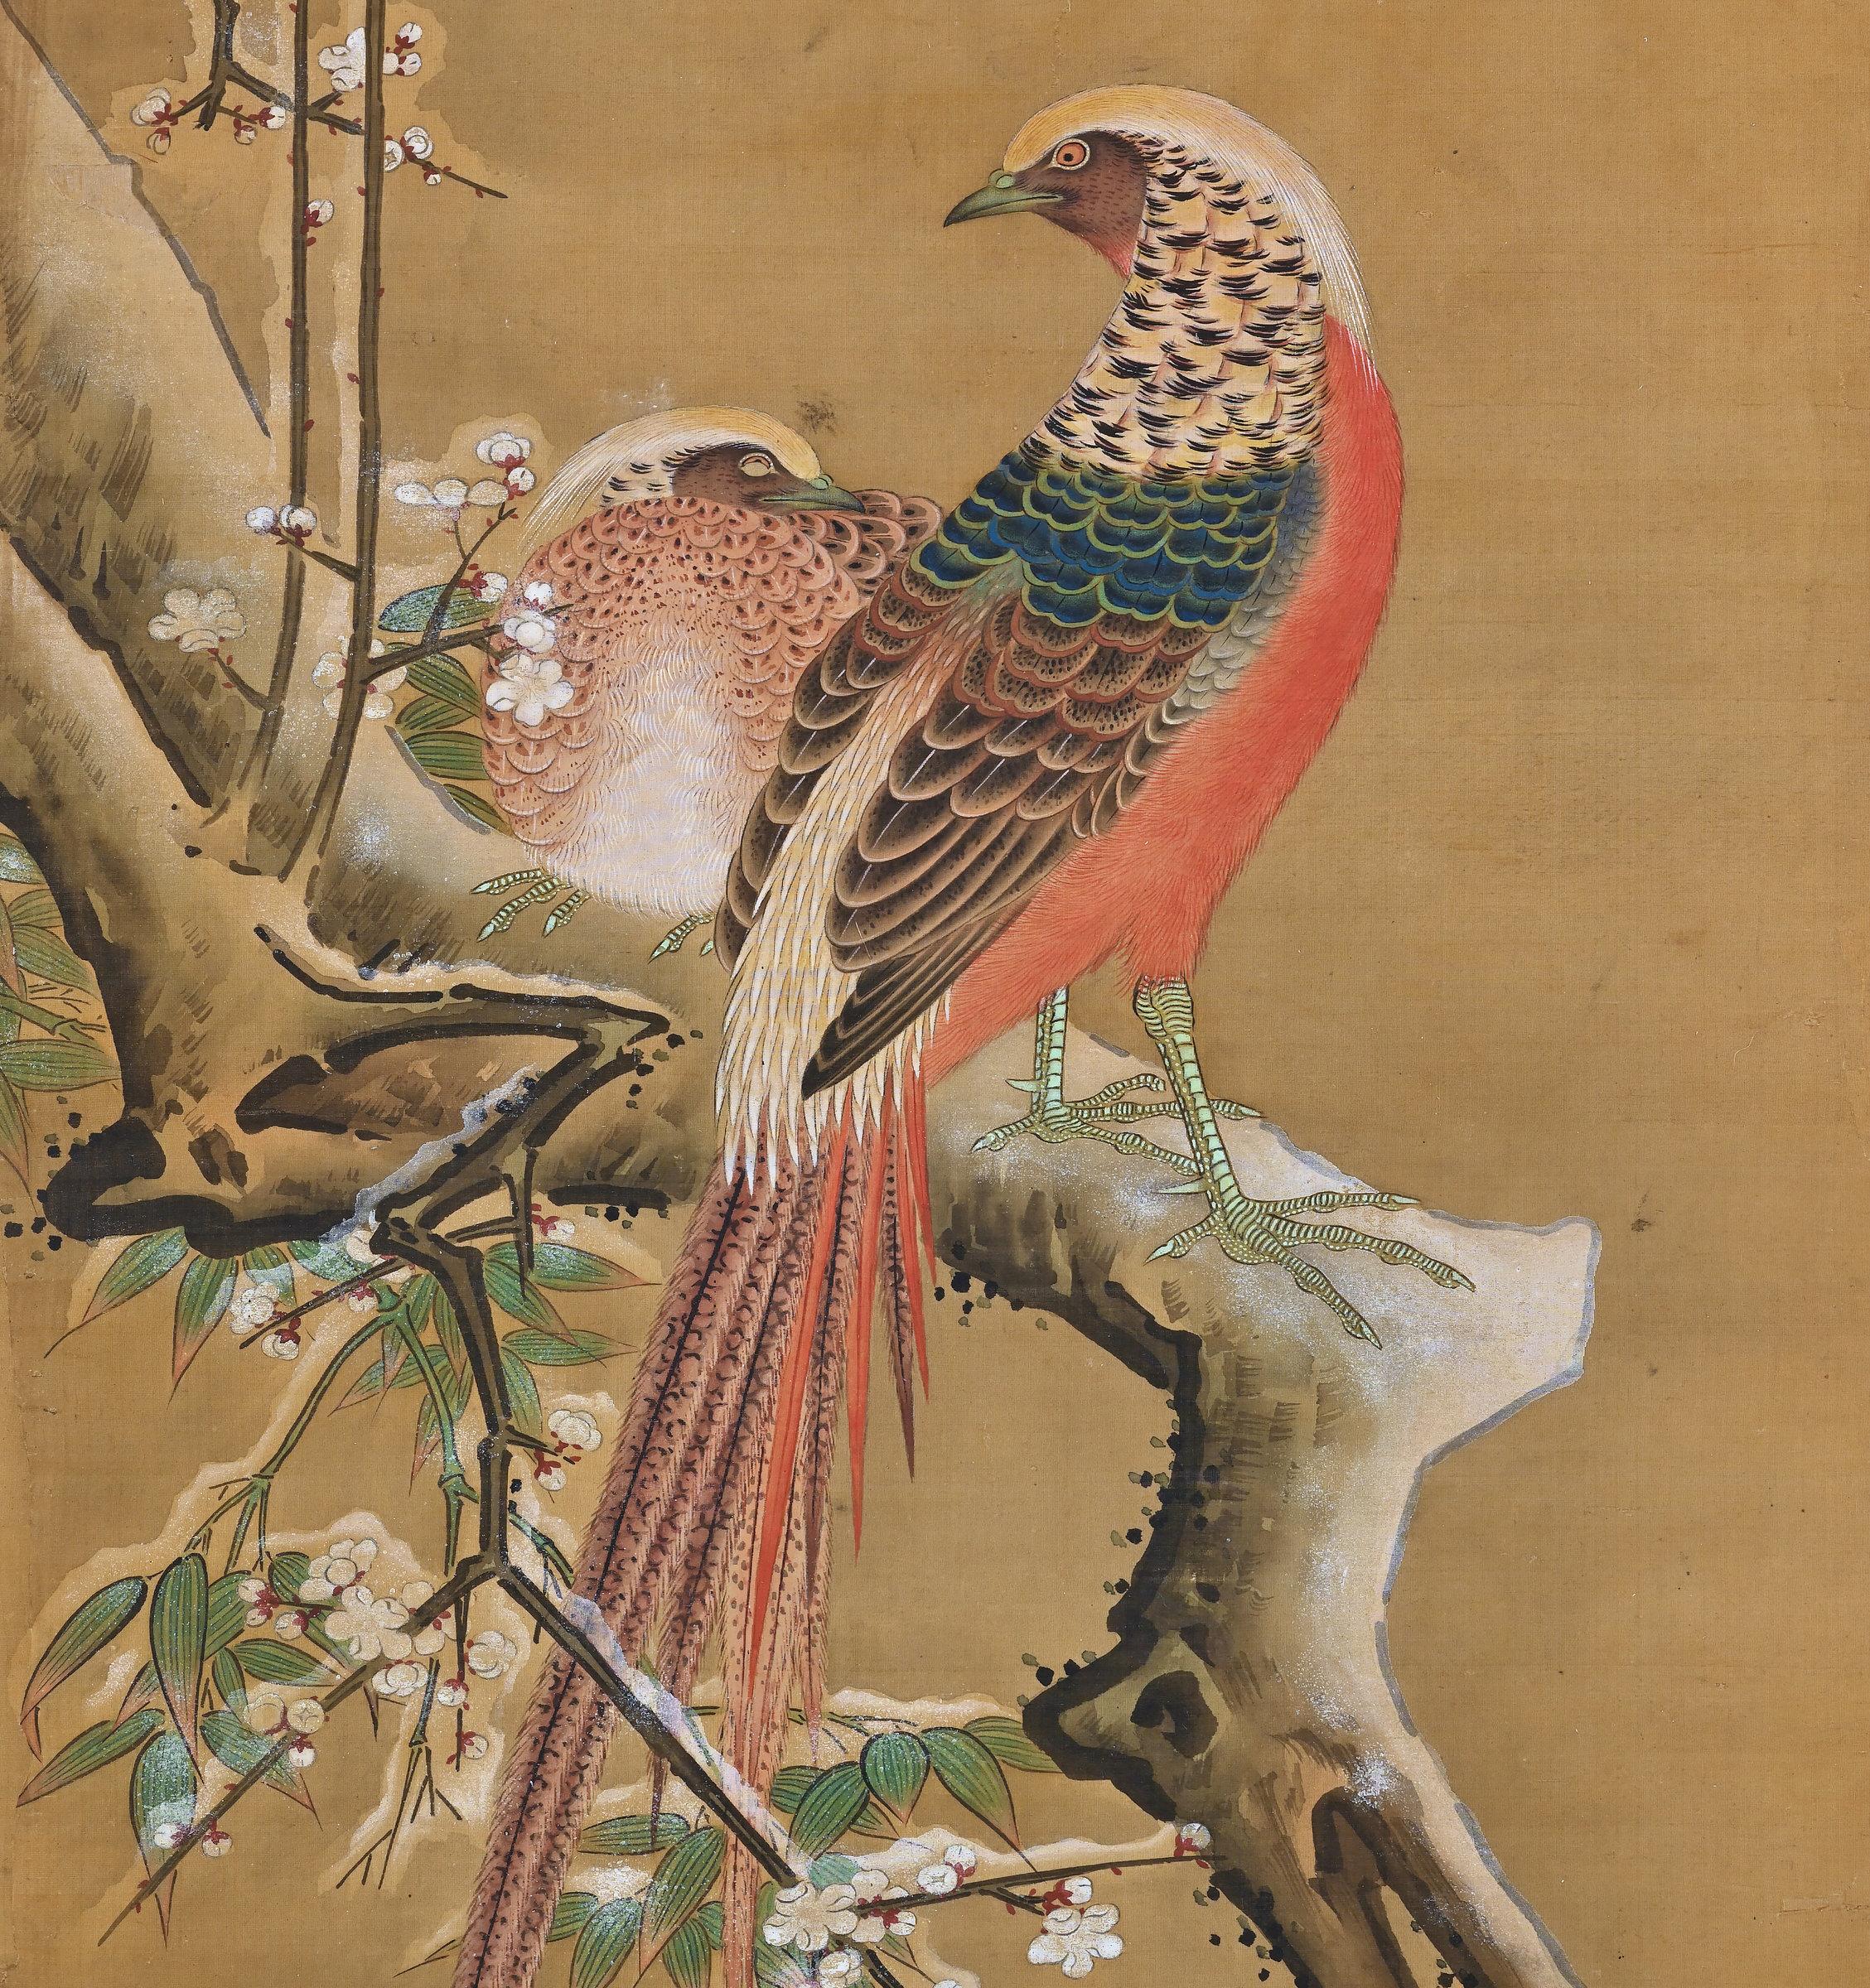 what do the peacocks and the birds symbolize in the silk painting above